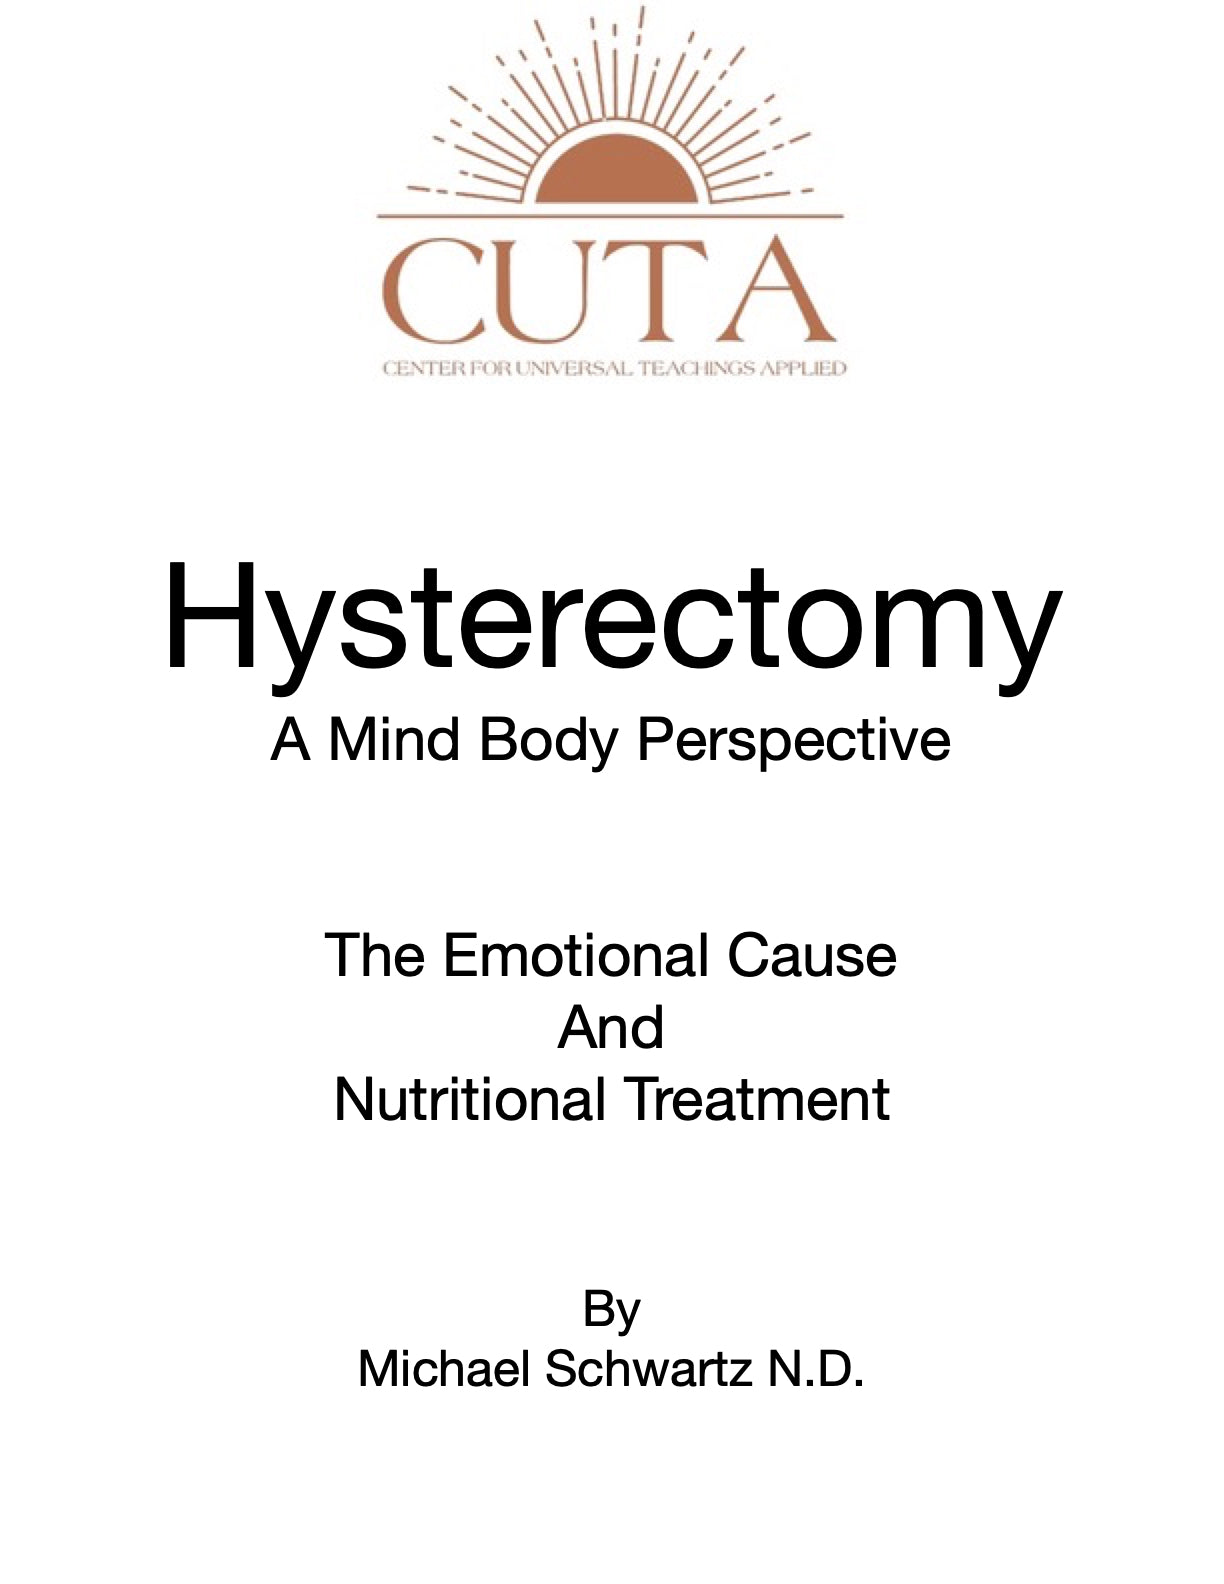 Hysterectomy Booklet